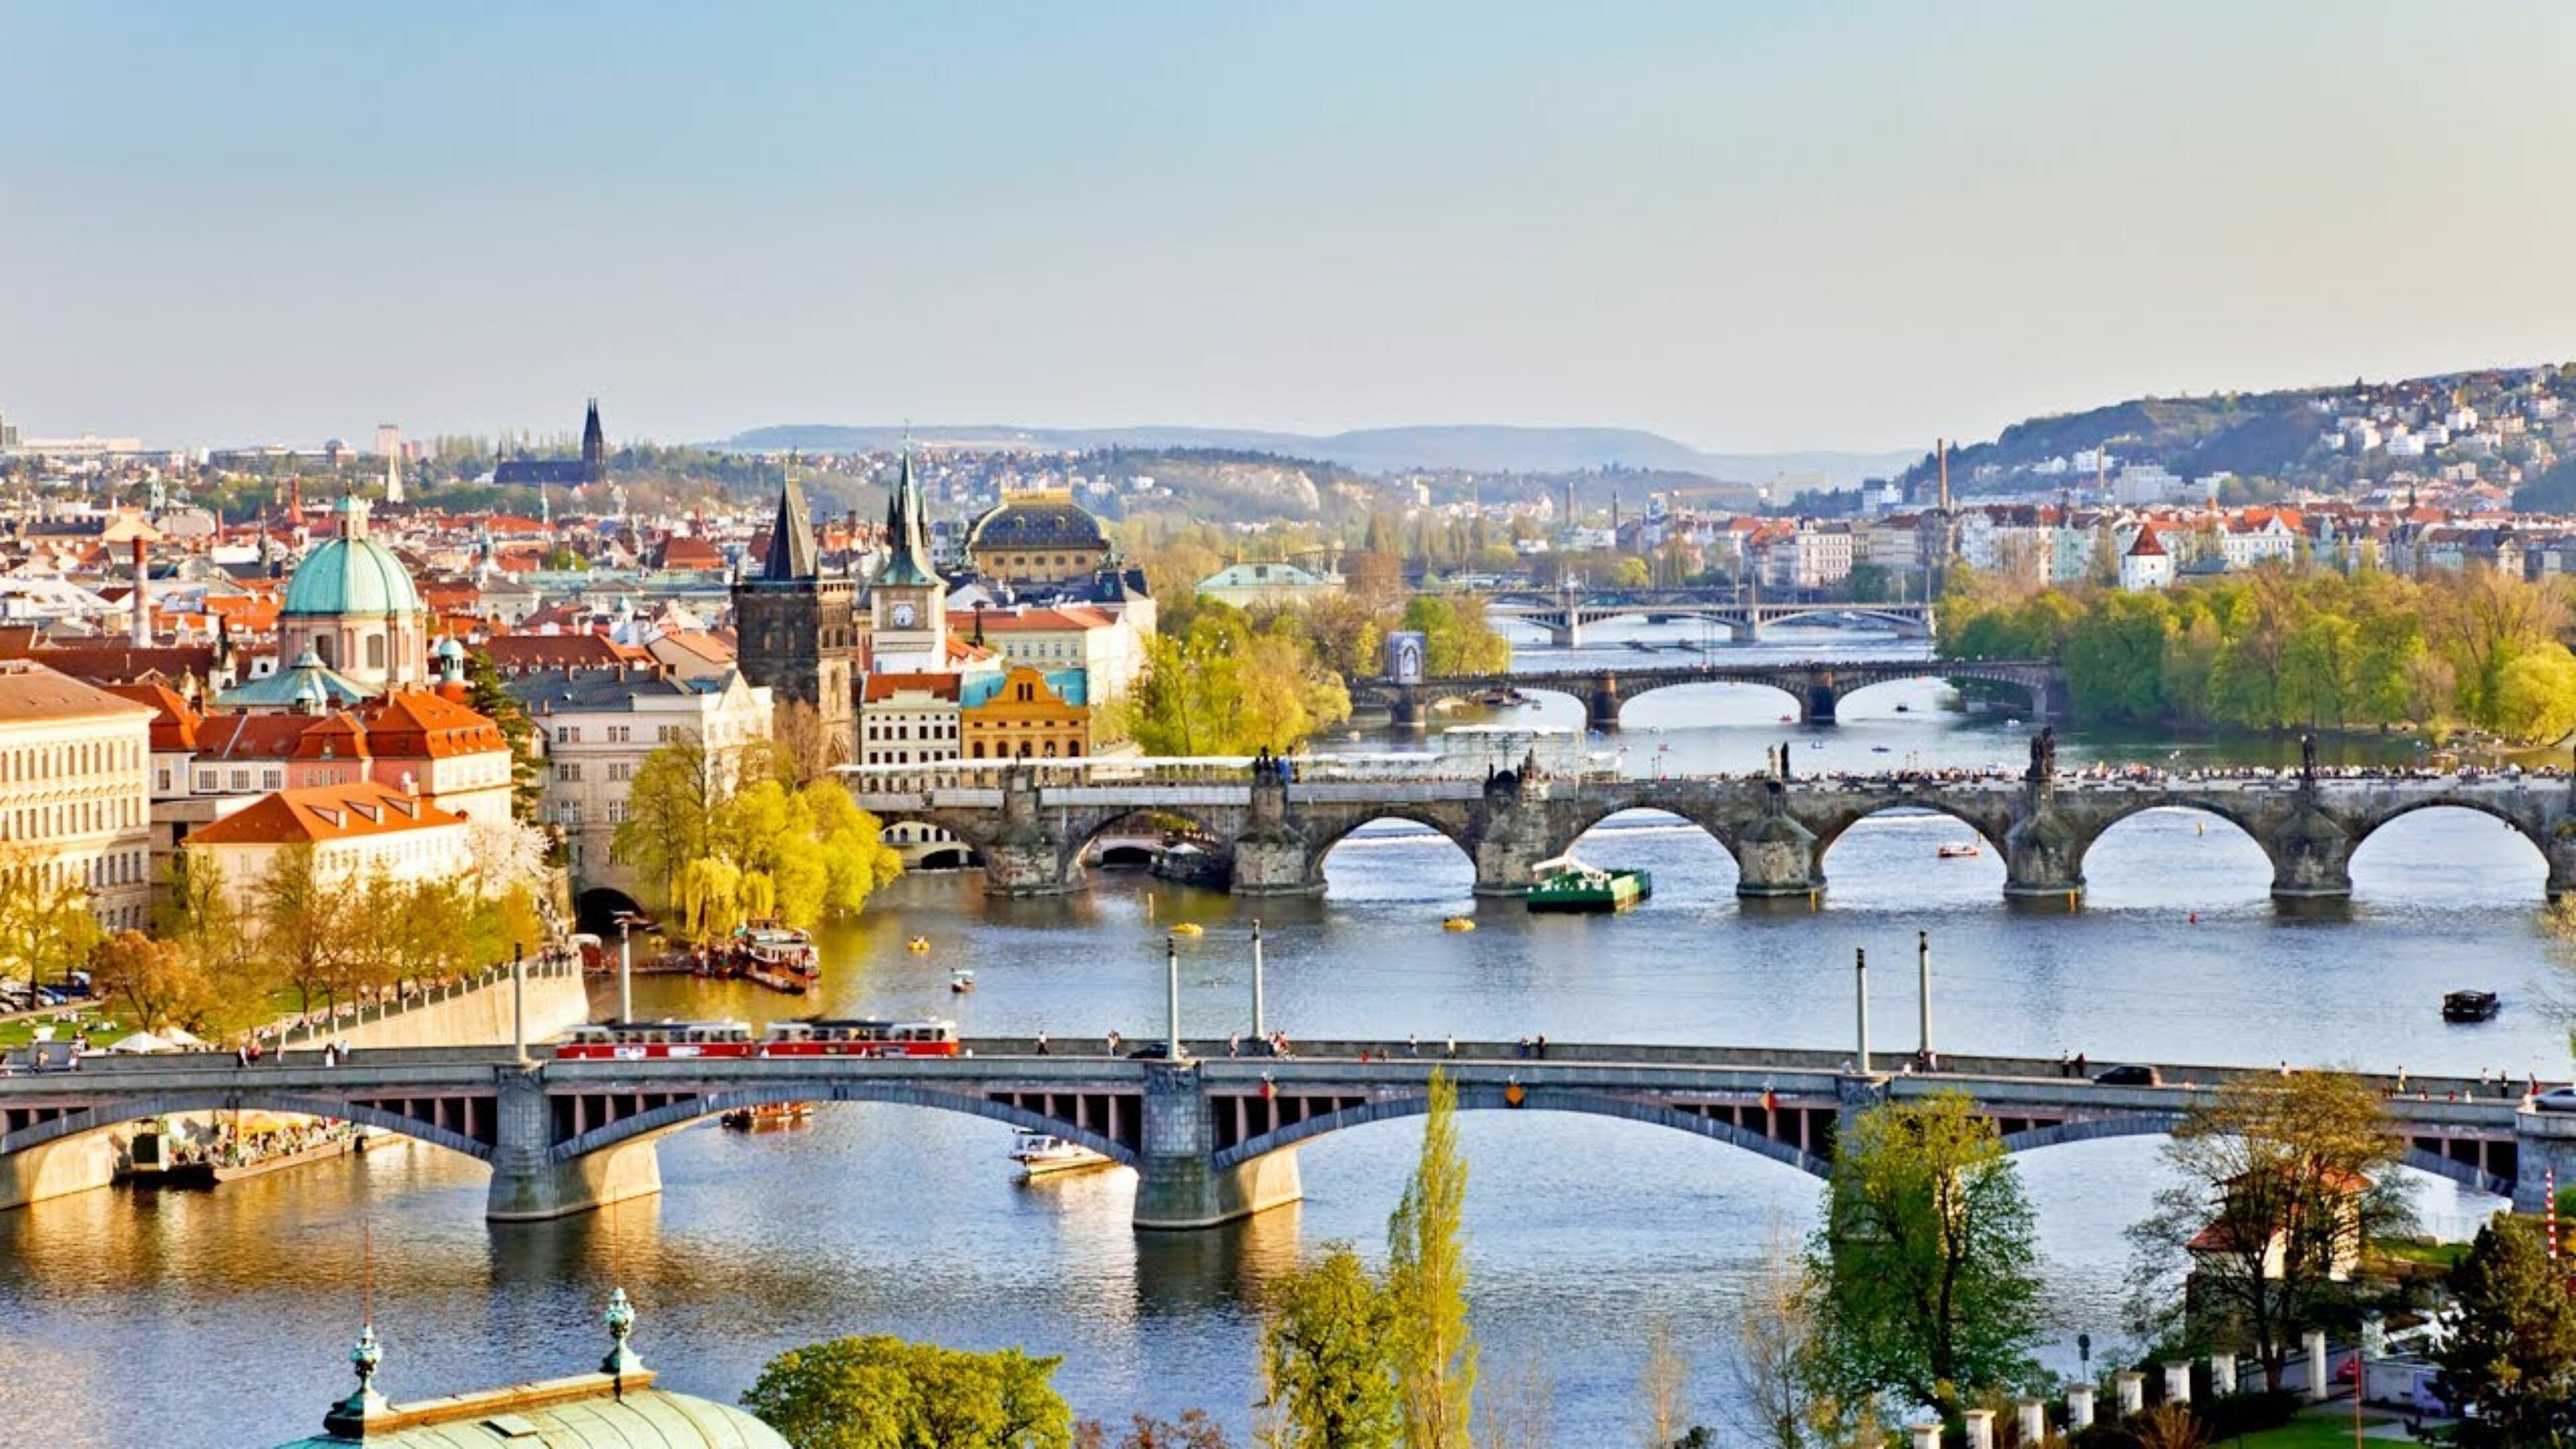 Prague Wallpaper: HD, 4K, 5K for PC and Mobile. Download free image for iPhone, Android